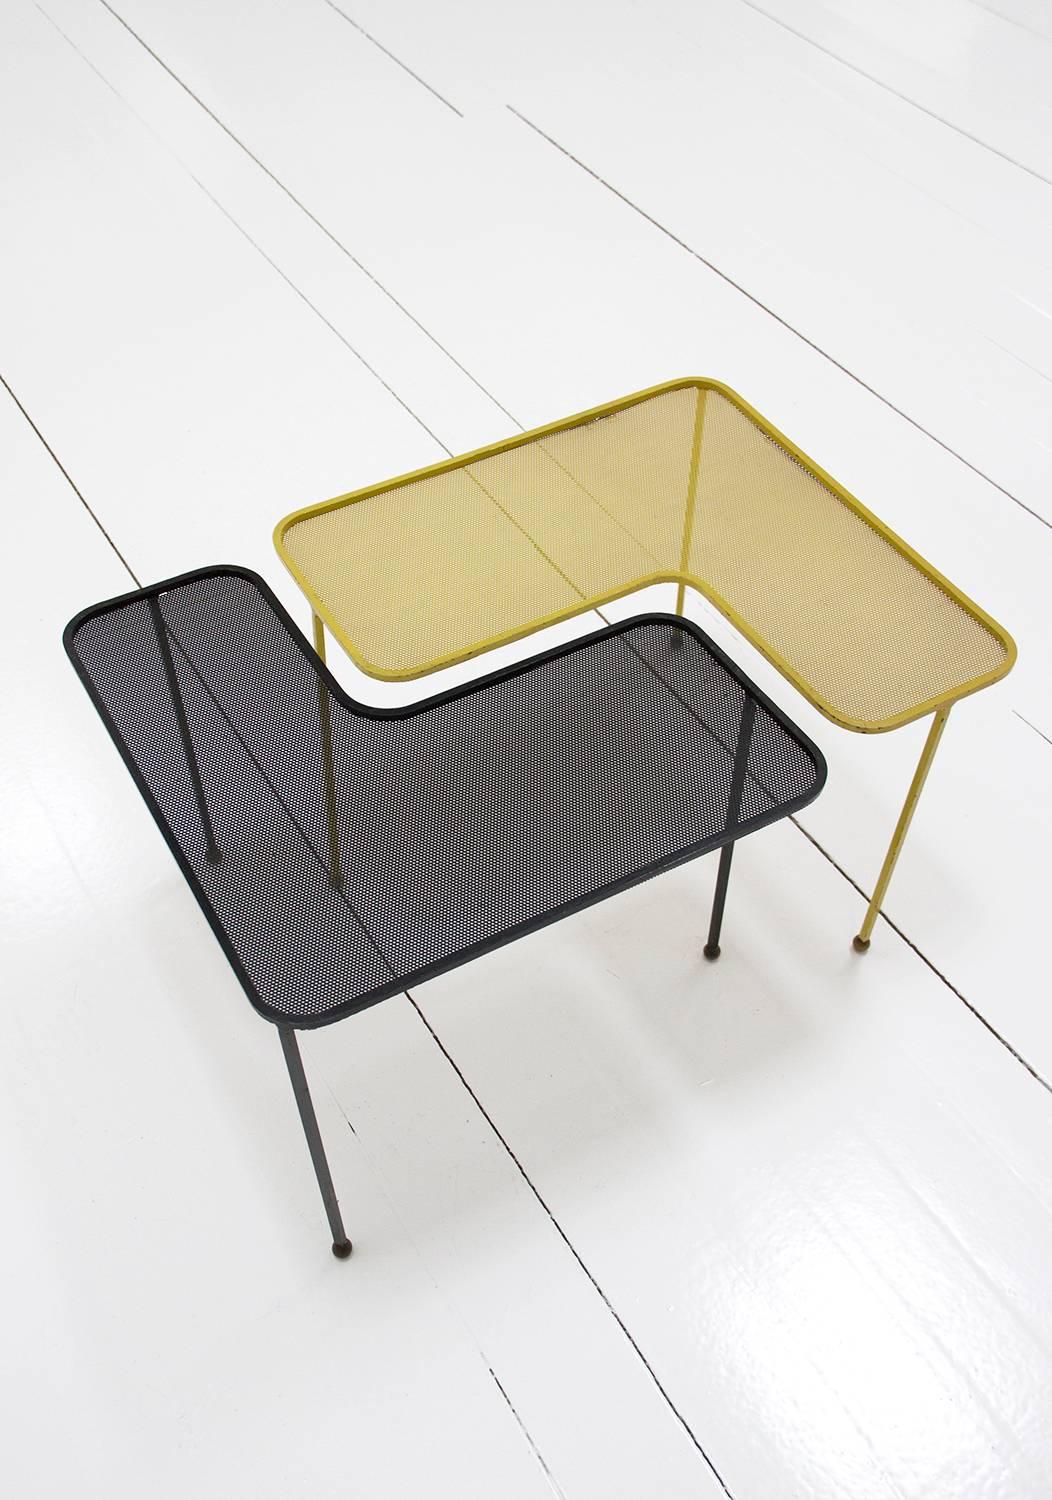 Mid-Century Modern Domino Table Designed by Mathieu Matégot Black and Yellow Metal, circa 1950 For Sale